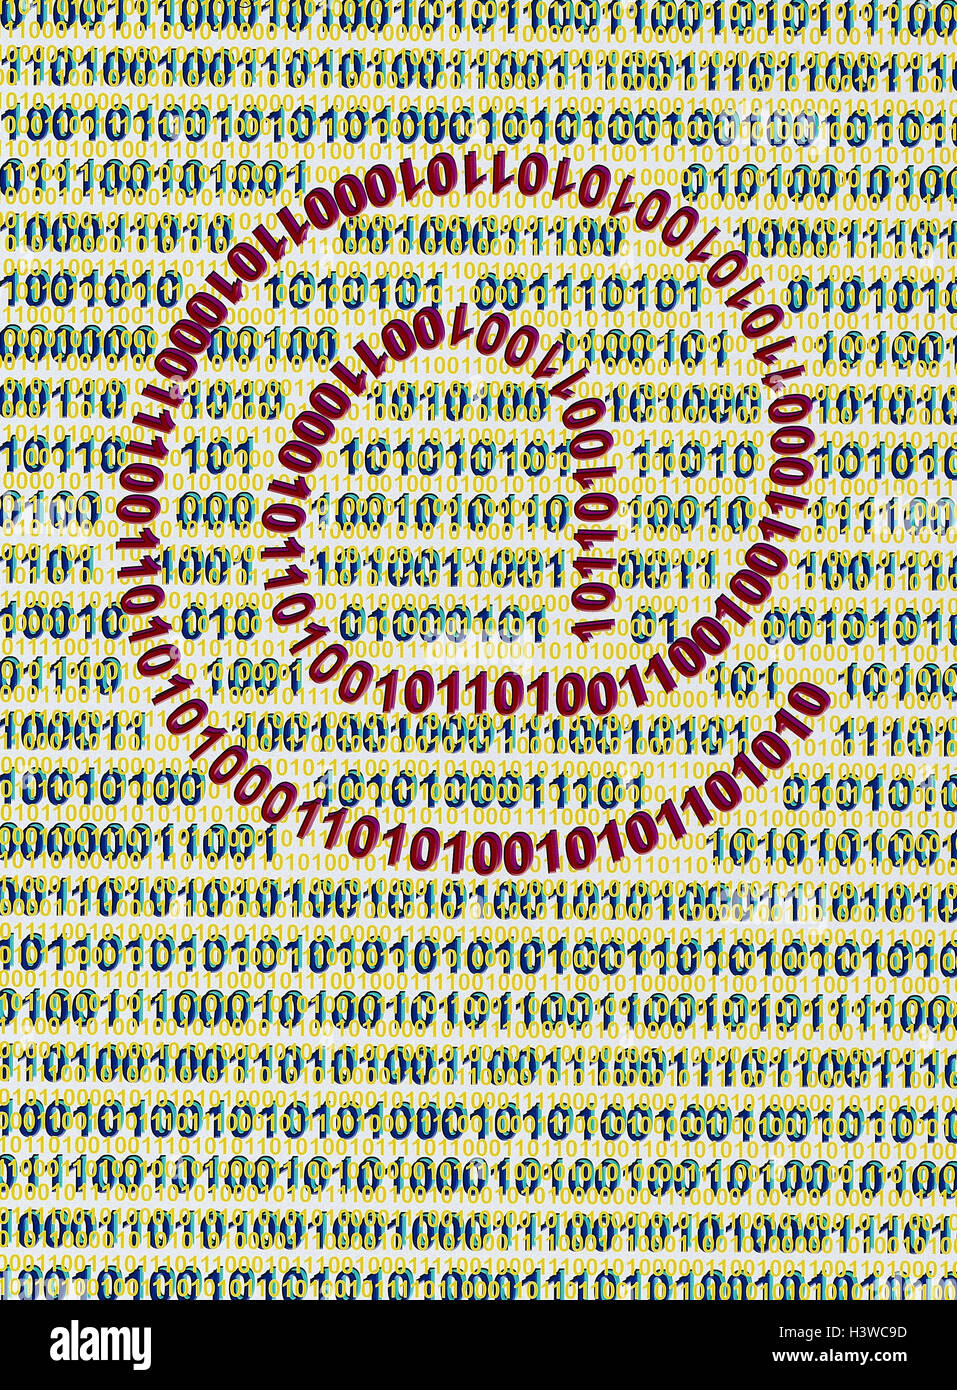 Binary code, at-sign, icon, binary file, coding, e-mail, Binary, system, At sign, Internet, www, decryption, encryption, encode, data, bits, Electronic message, figure system, binary numbers, at symbol, post, electronically Stock Photo